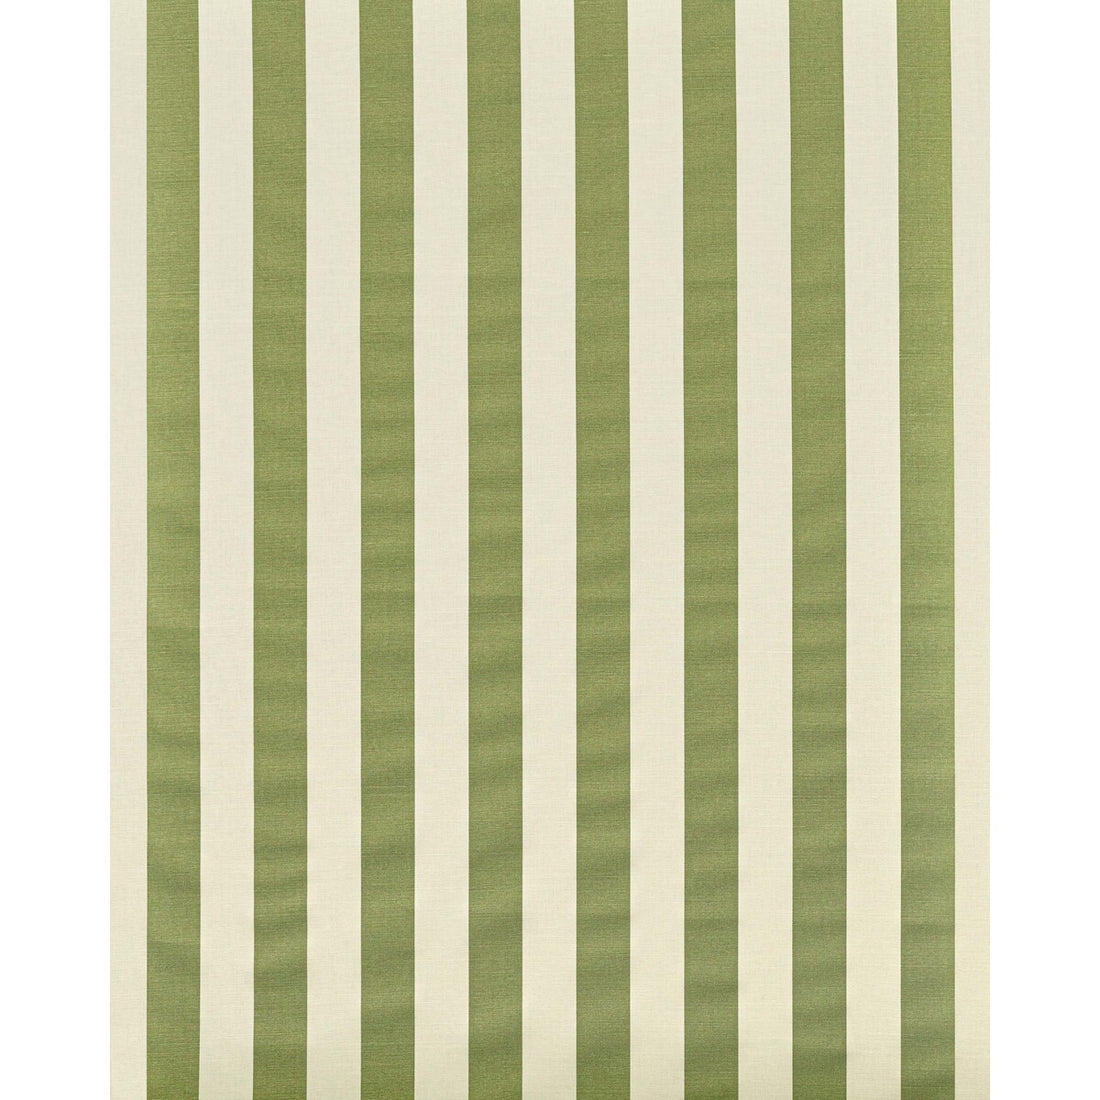 Avenue Stripe fabric in green on white color - pattern 2022120.3.0 - by Lee Jofa in the Paolo Moschino Persepolis collection